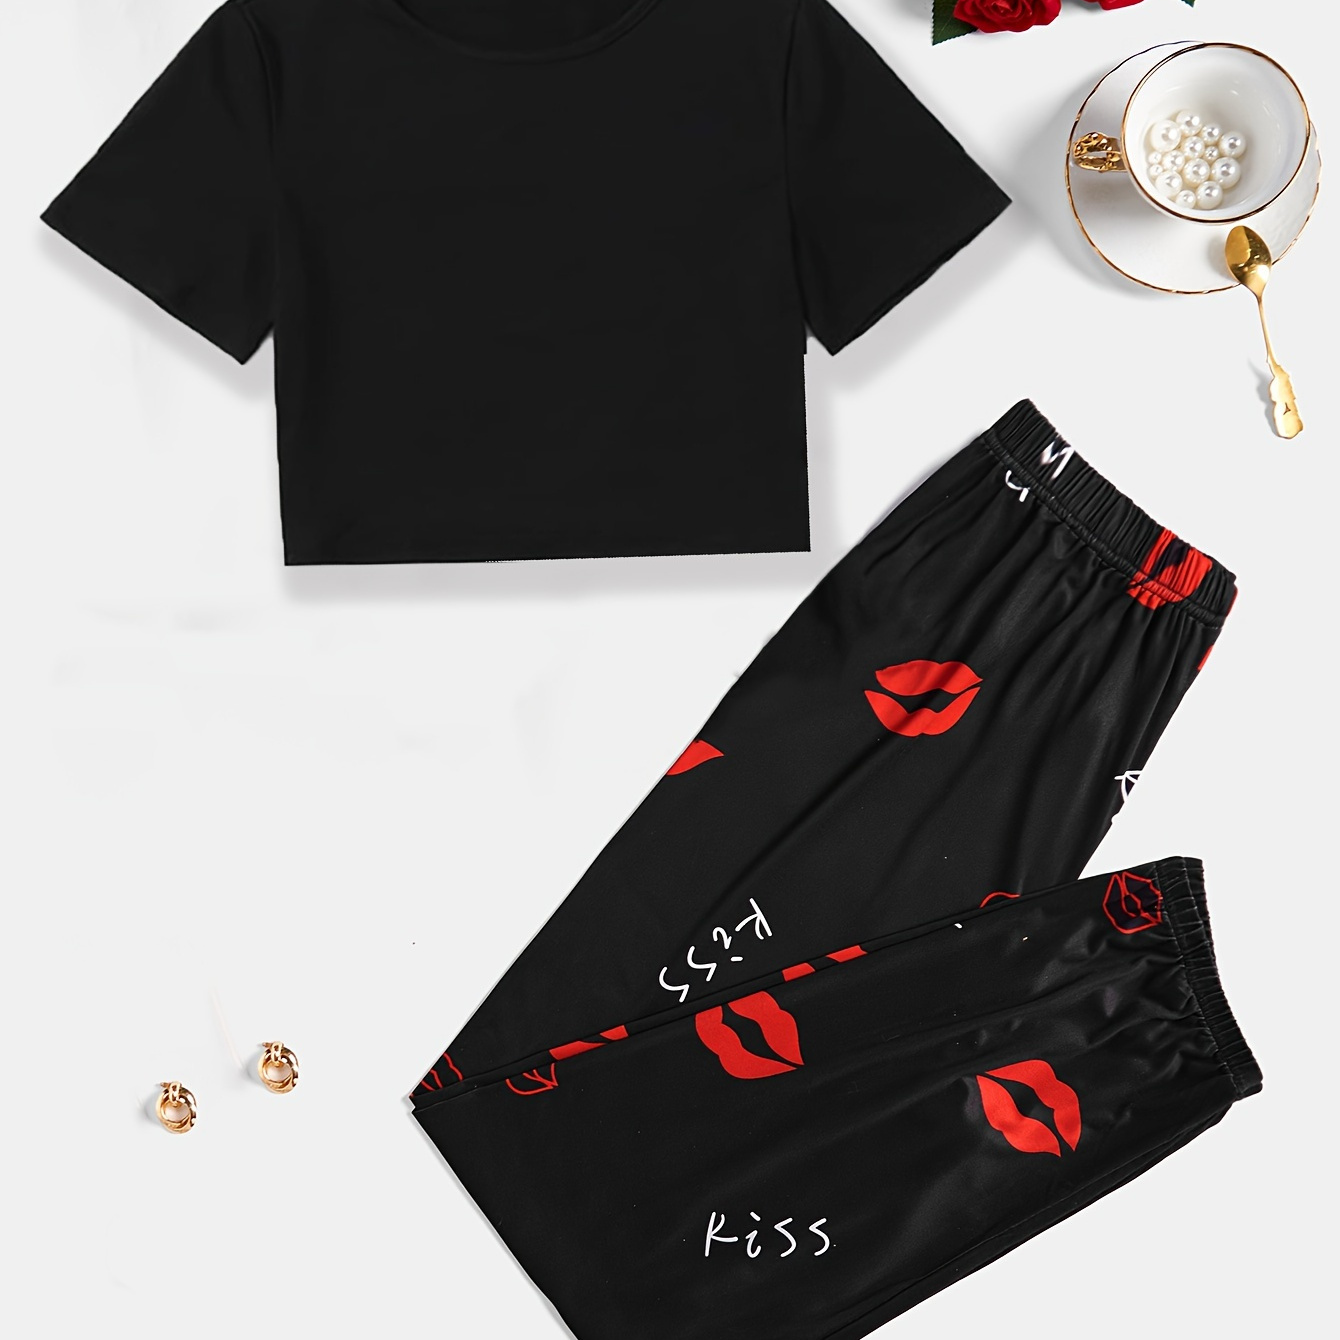 

Casual Red Lip & Letter Print Pajama Set, Short Sleeve Crew Neck Crop Top & Elastic Joggers For Valentine's Day, Women's Sleepwear & Loungewear